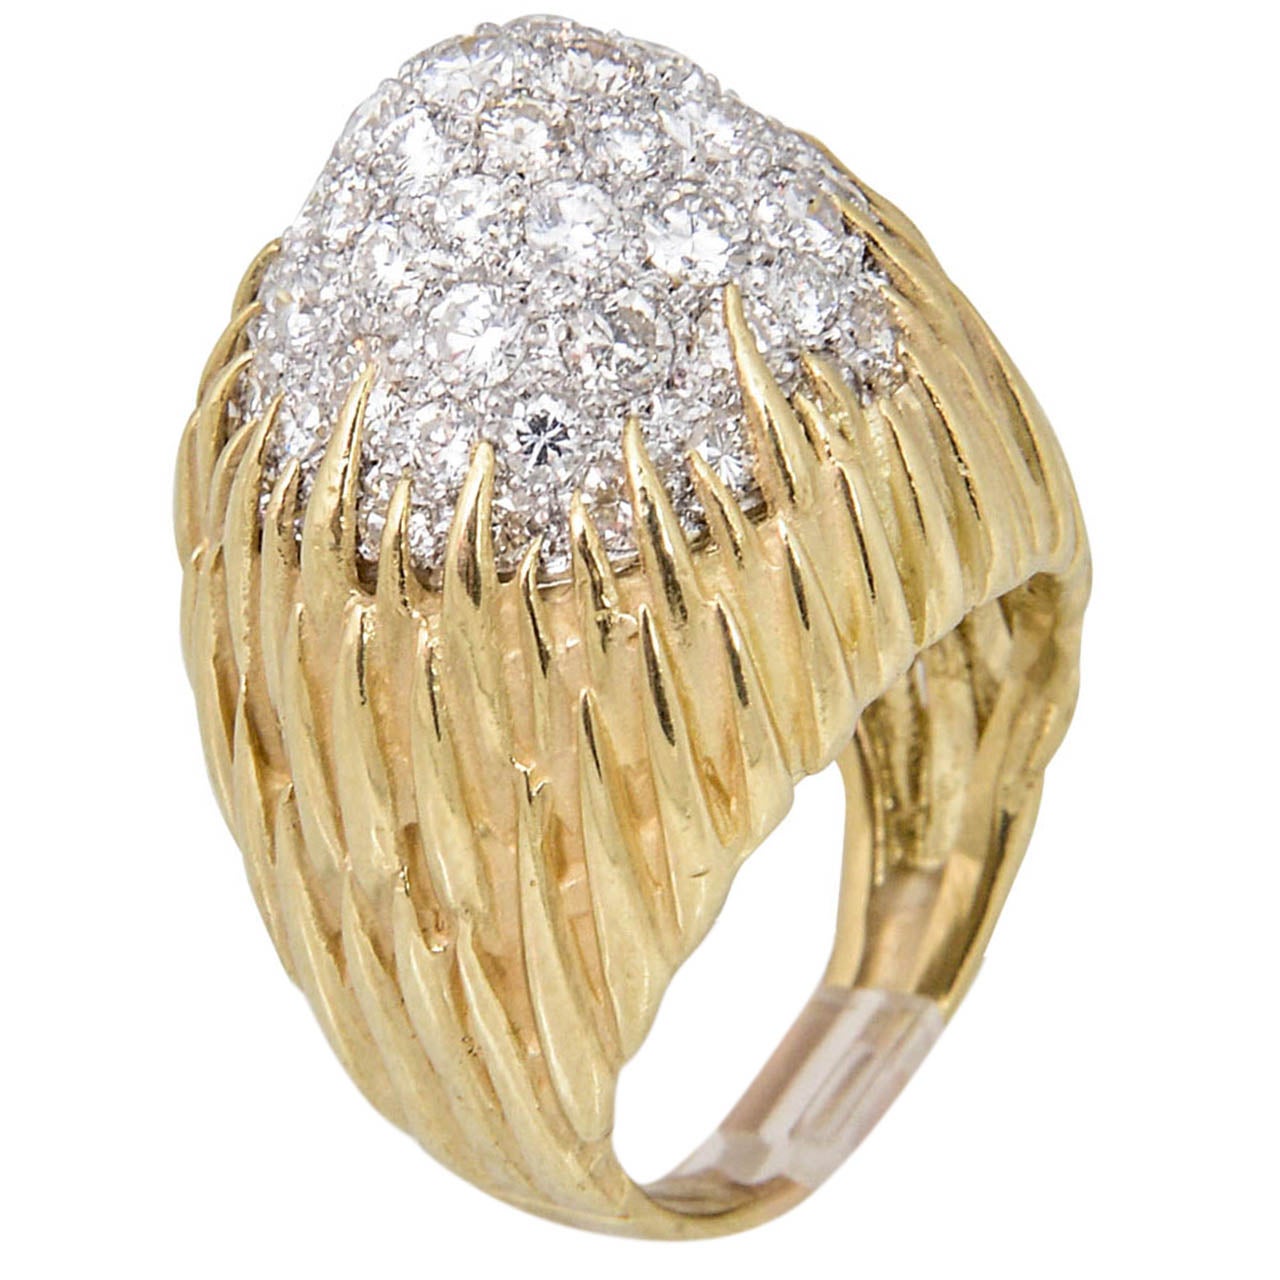 1960s-1970s Pave Diamond Gold Floral Design Dome Ring